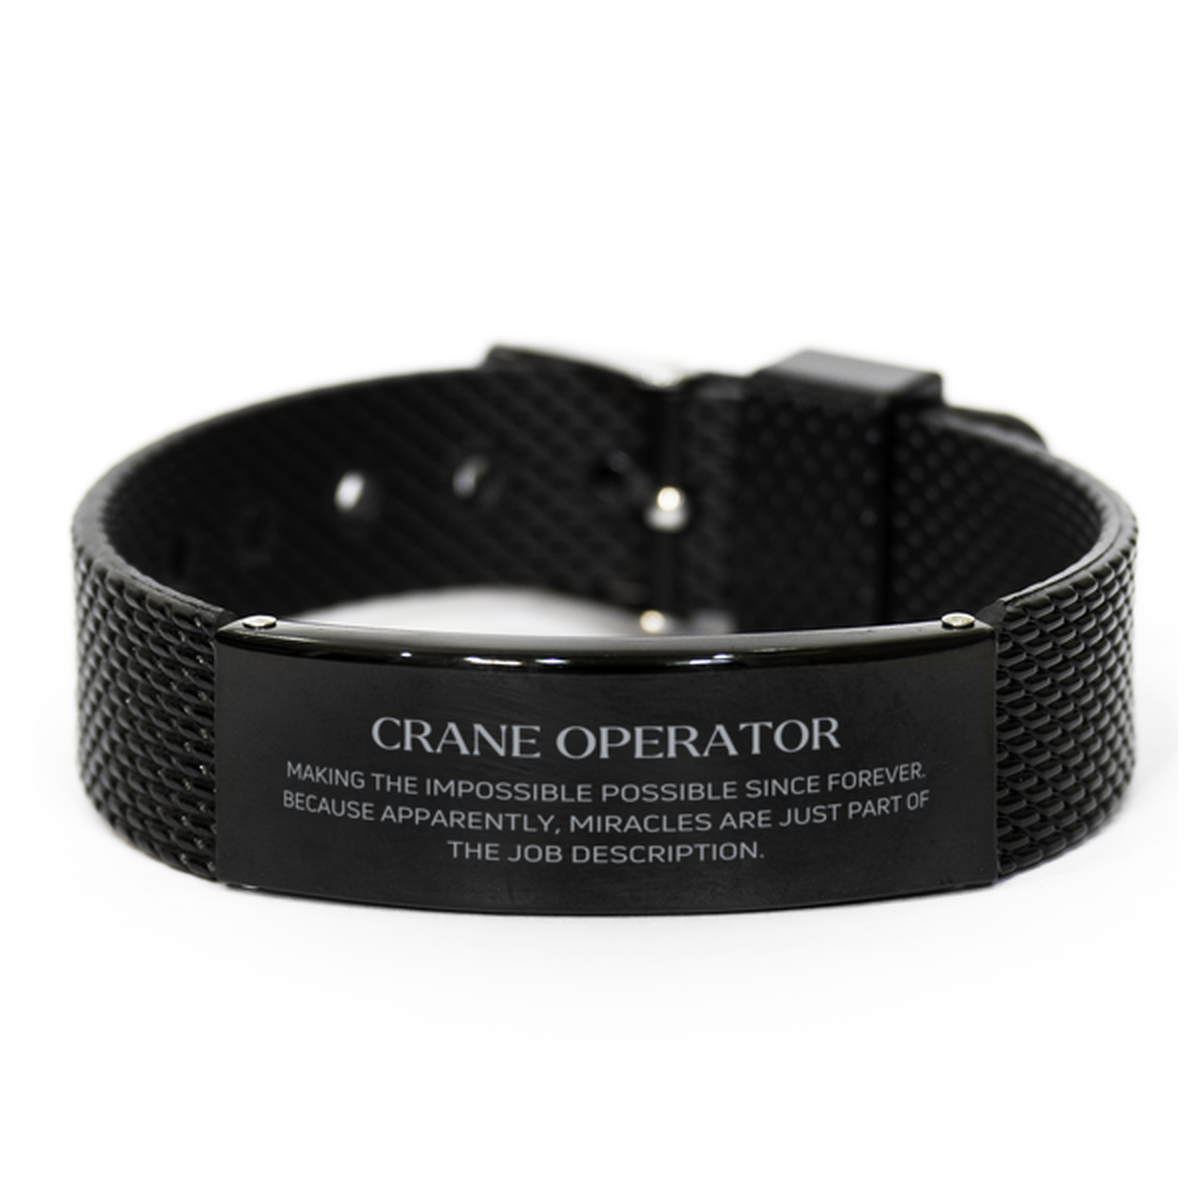 Funny Crane Operator Gifts, Miracles are just part of the job description, Inspirational Birthday Black Shark Mesh Bracelet For Crane Operator, Men, Women, Coworkers, Friends, Boss